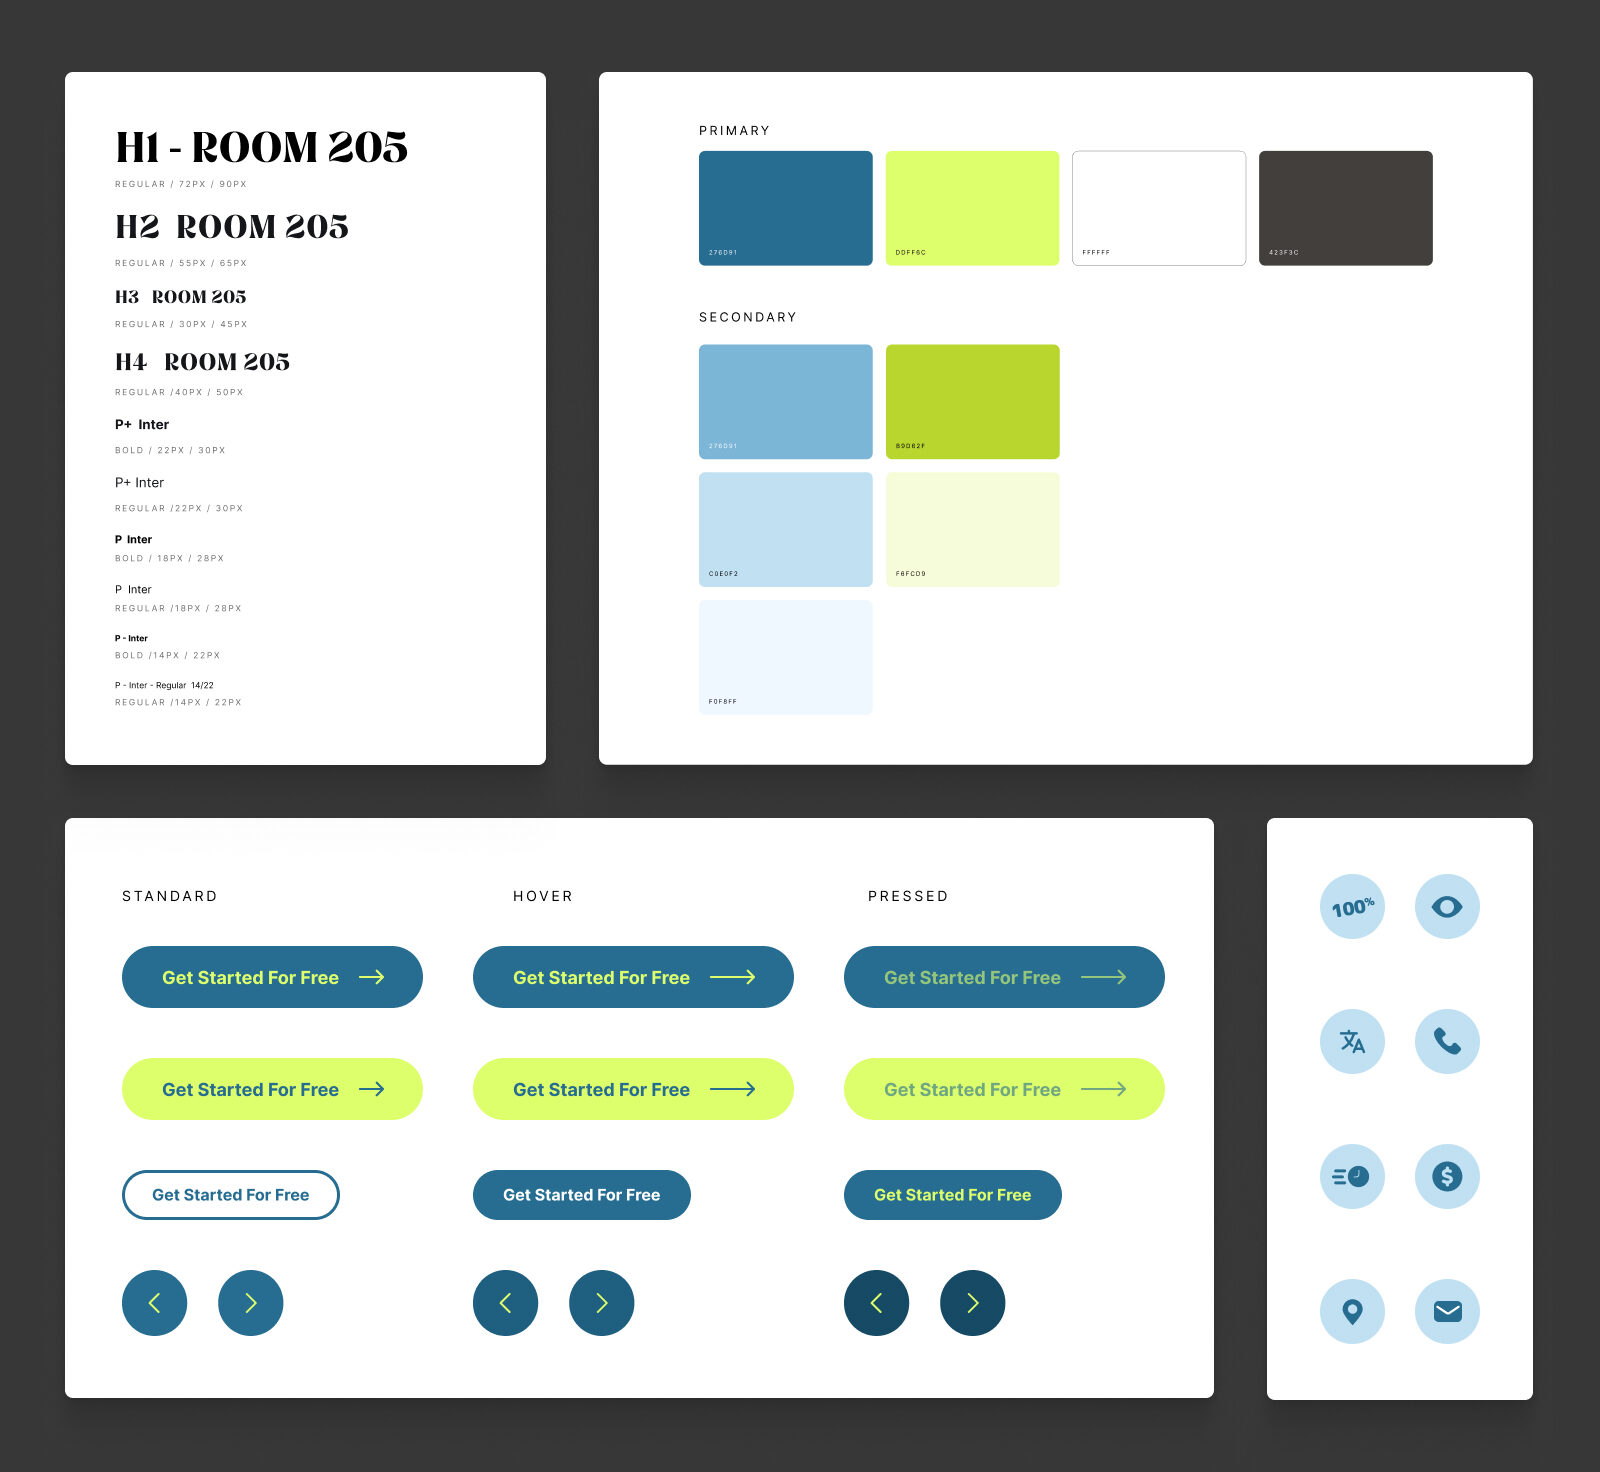 Design system layout showcasing typography styles, color palette with primary and secondary colors, button states including standard, hover, and pressed, and a set of circular icons.